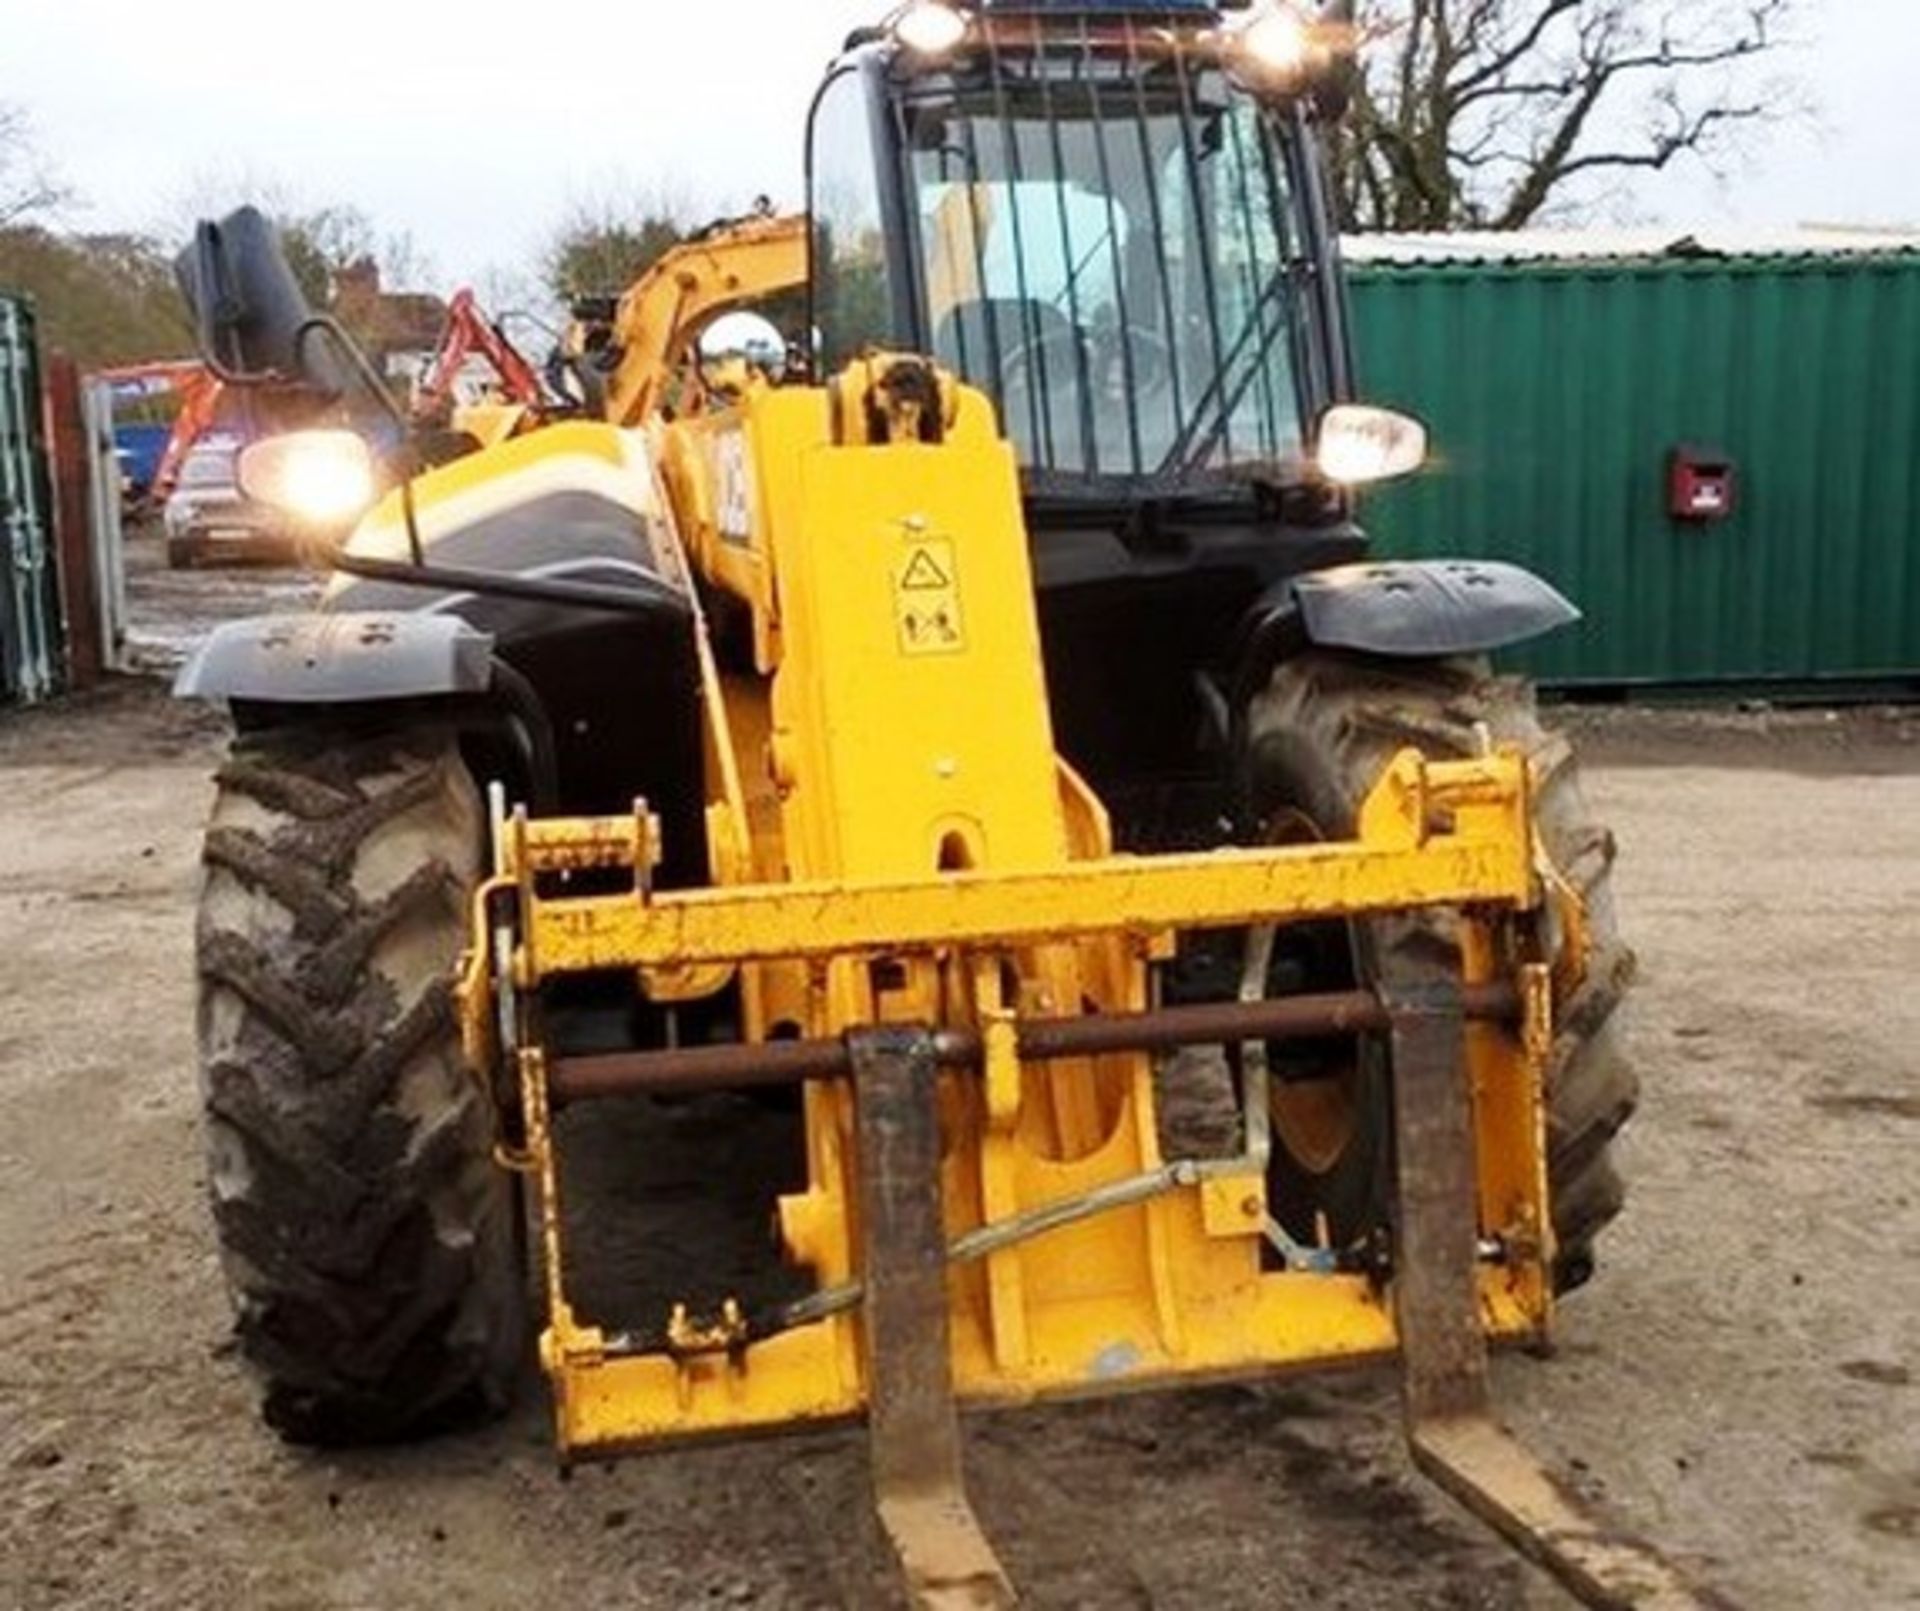 2014 JCB 531-70 TELEHANDLER, SN 2181521, 1399 HOURS, AUX PIPE WORK, MANUAL QUICK HITCH, 60% TYRE - Image 11 of 13